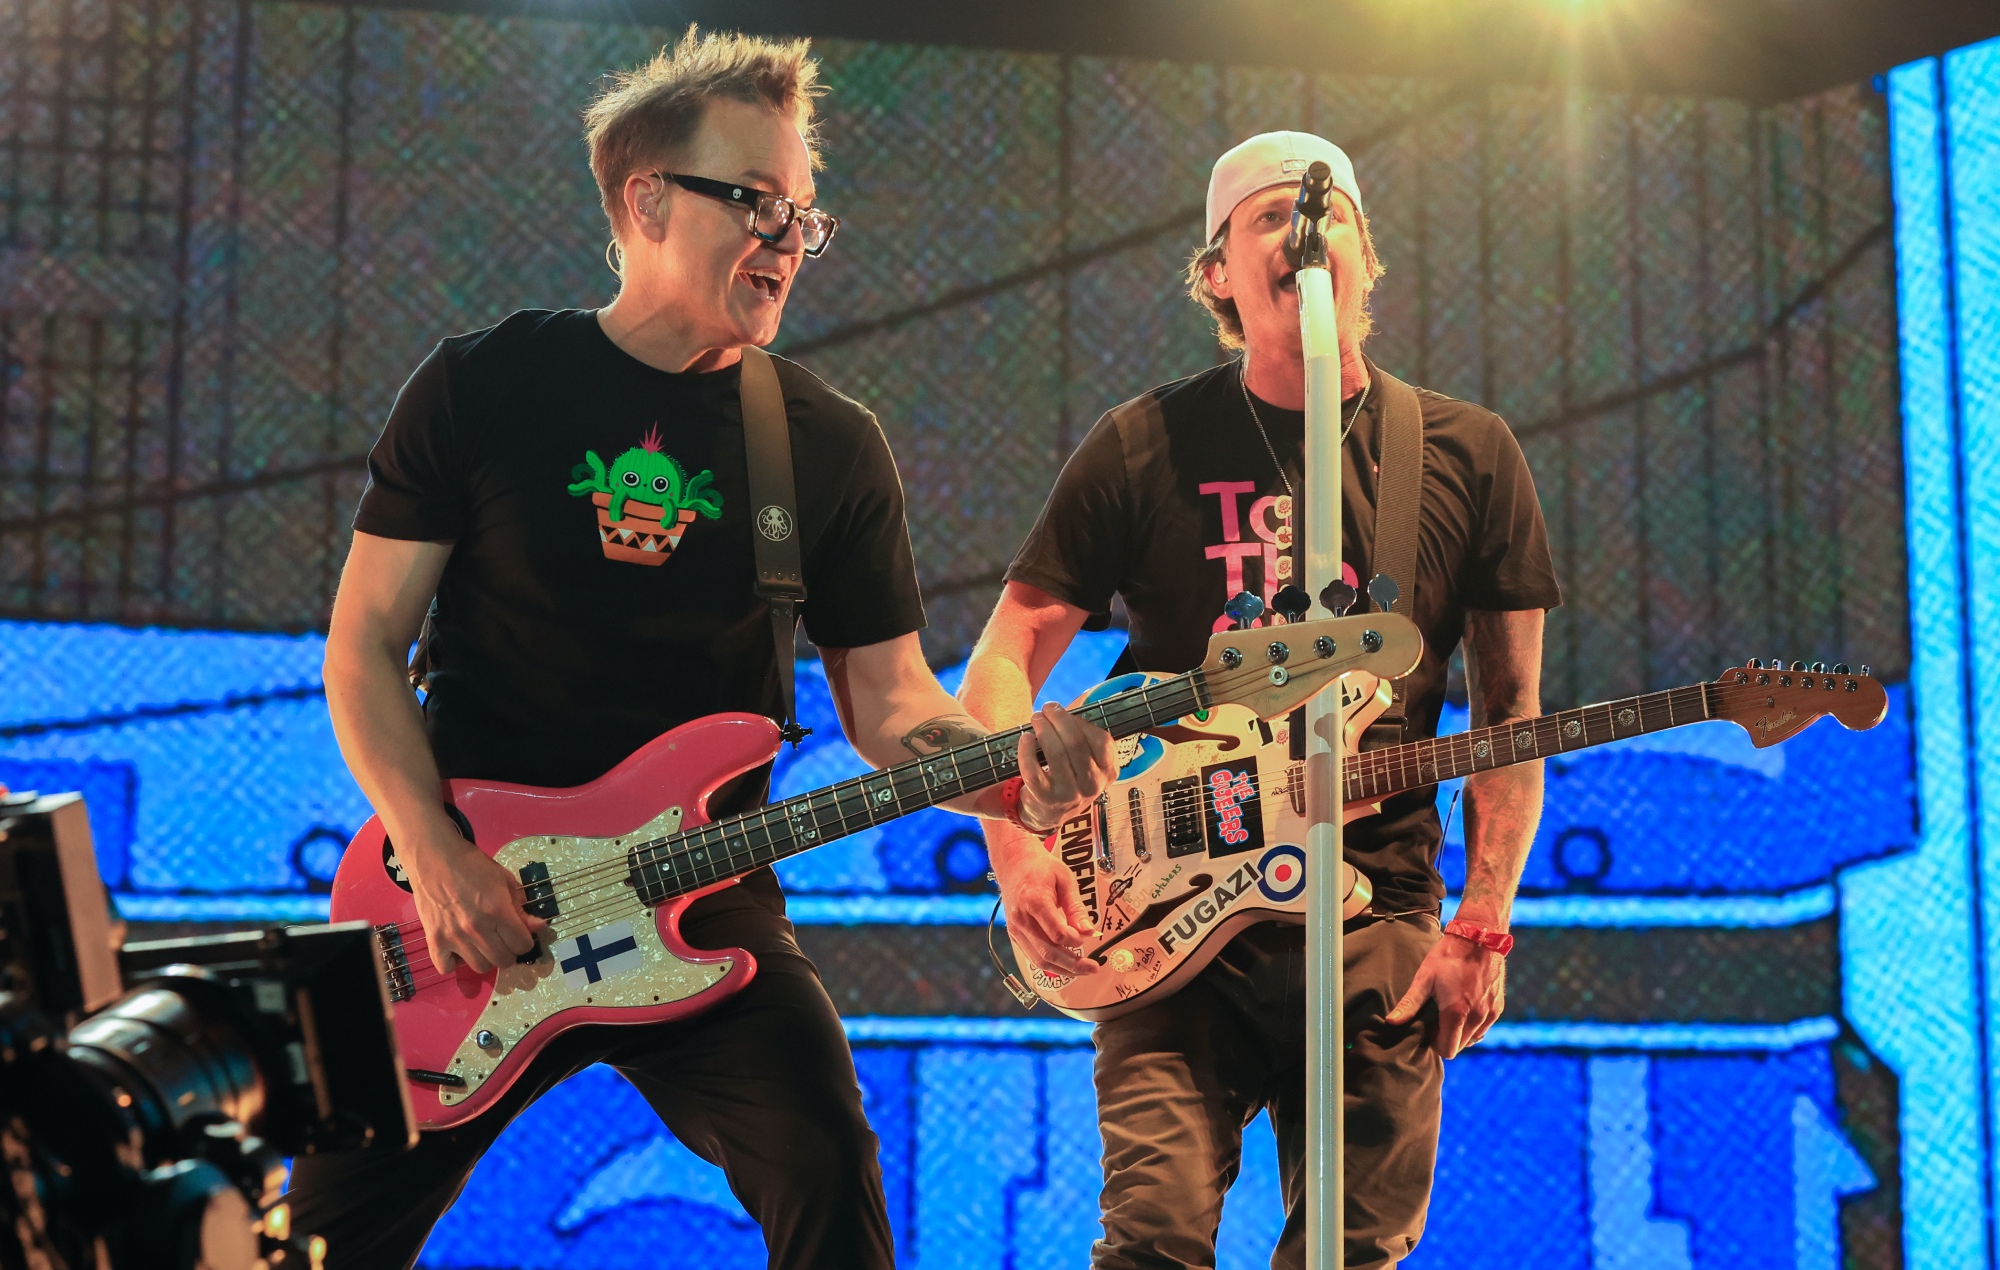 Mark Hoppus and Tom DeLonge performing live on stage with Blink-182